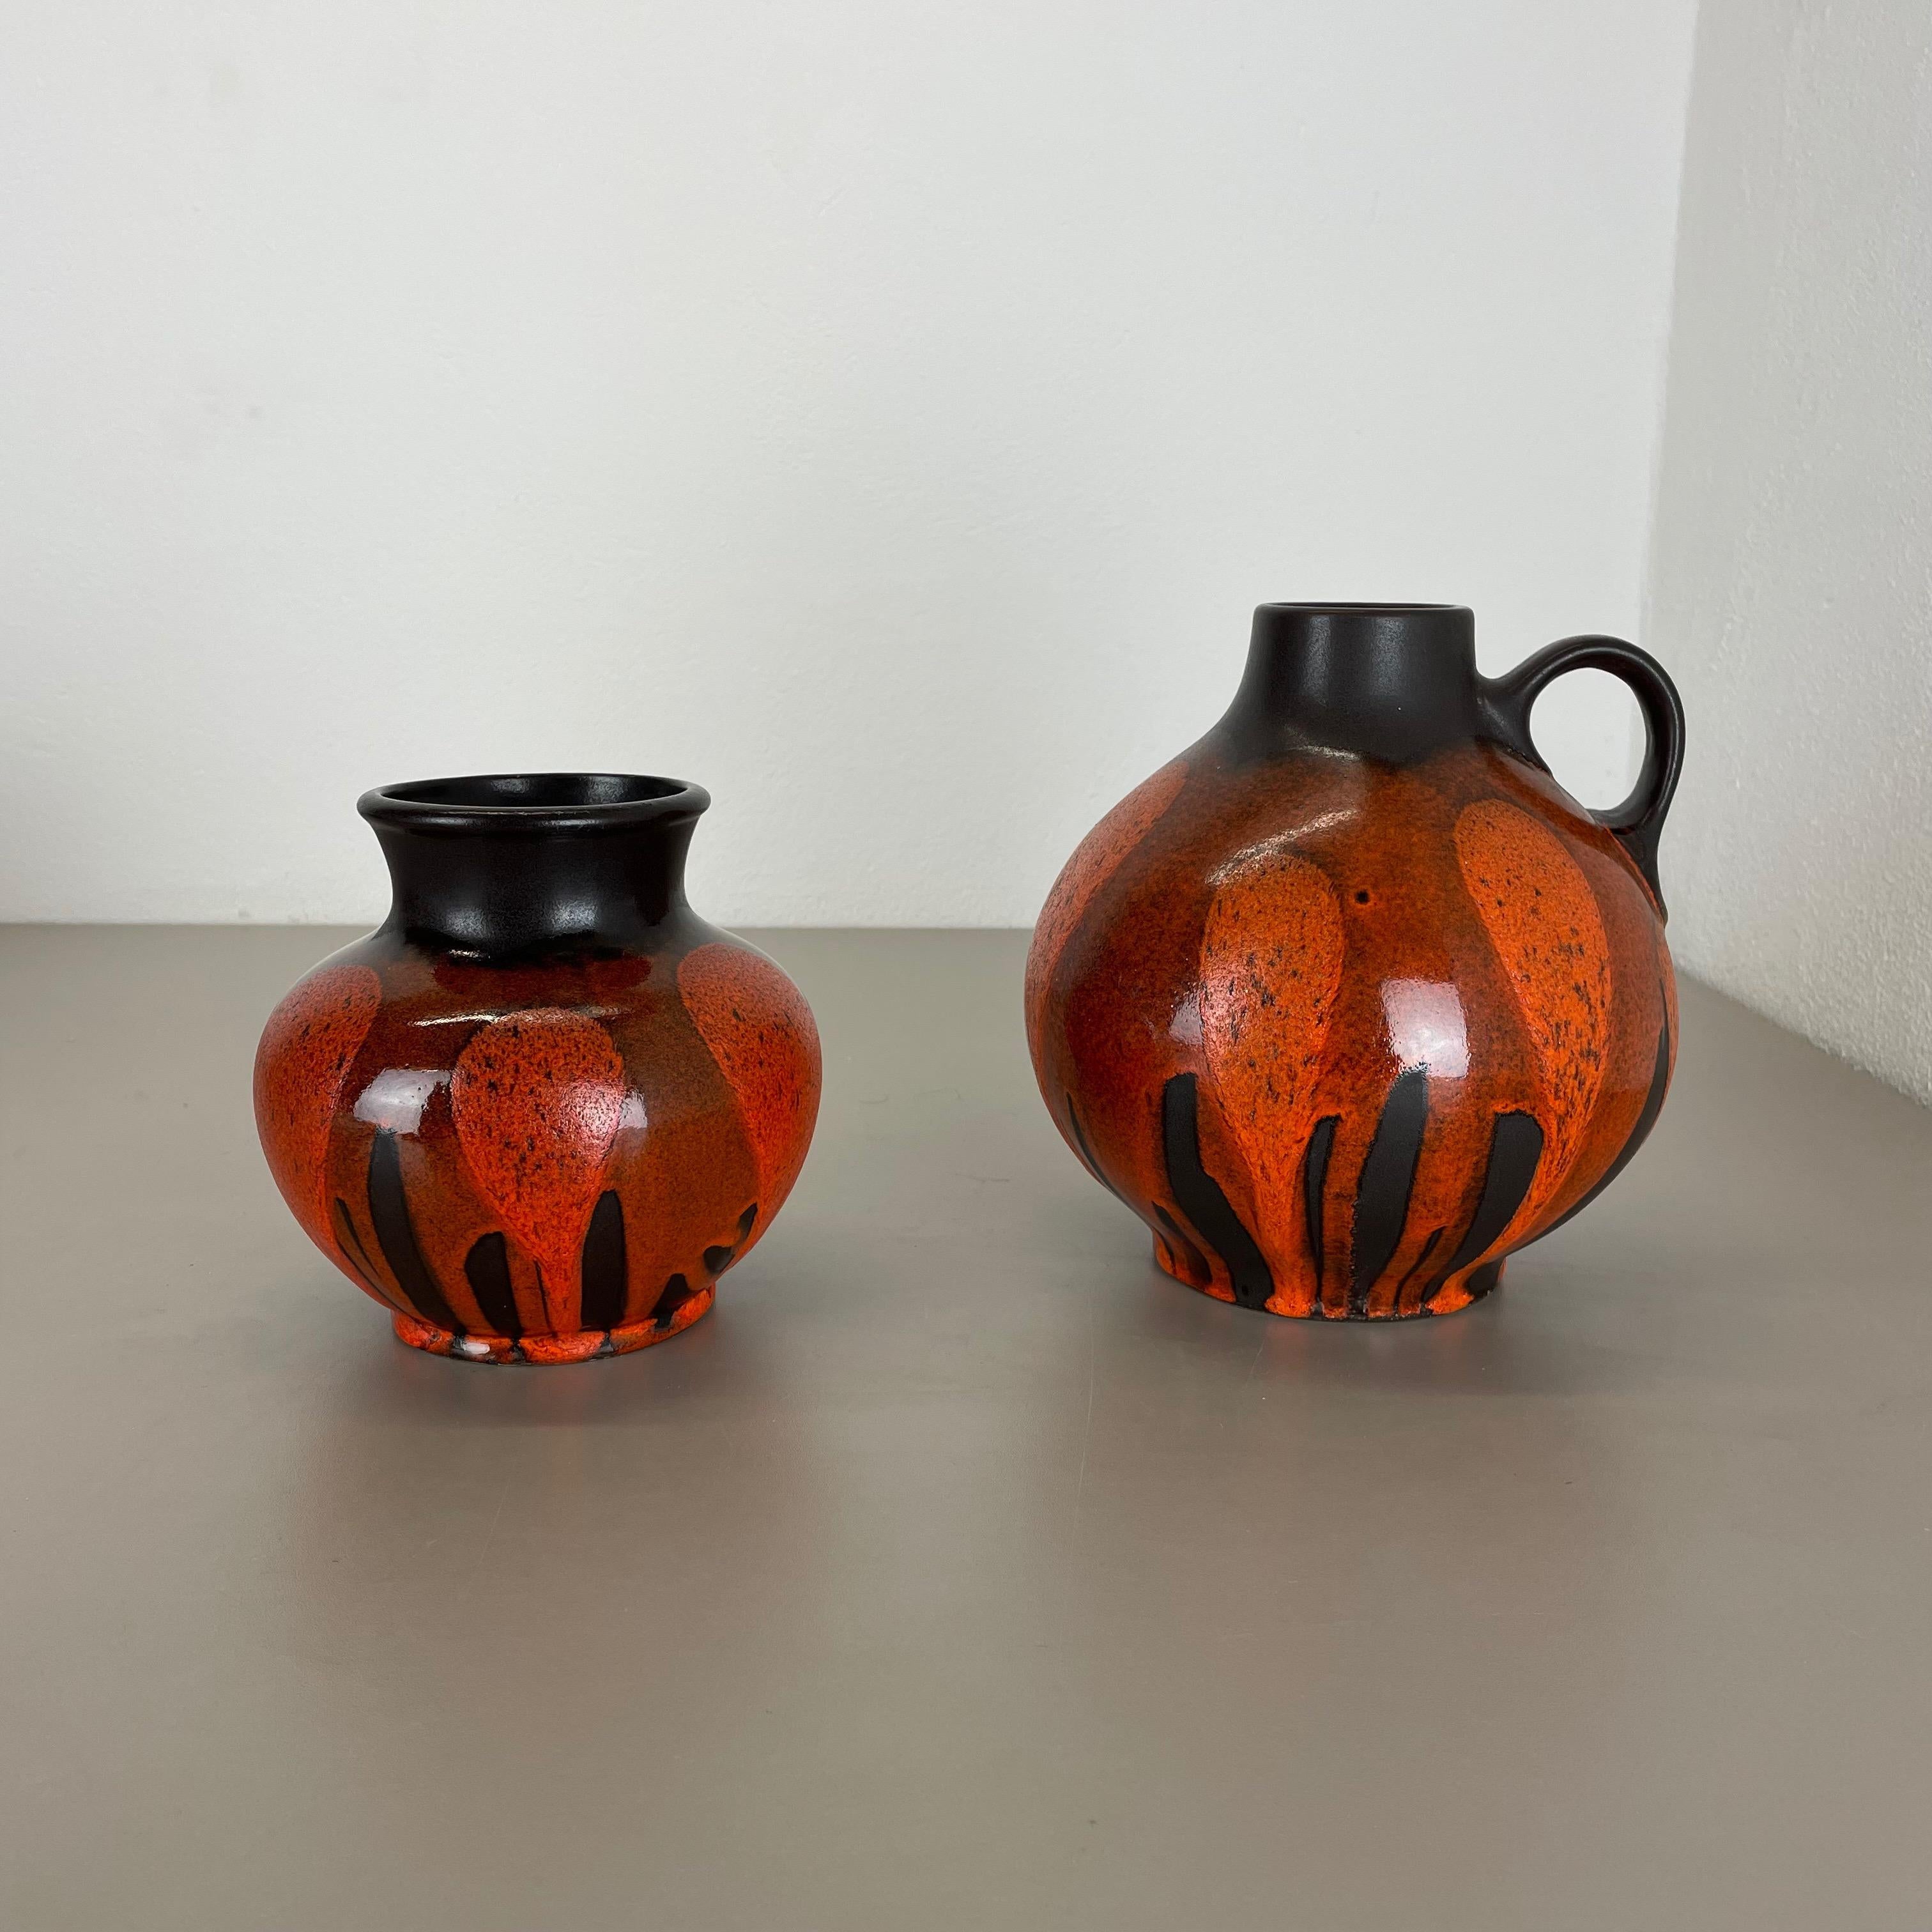 Article:

Set of two ceramic vase elements


Producer:

Steuler, Germany



Decade:

1970s


Description:

These original vintage Vase was produced in the 1970s in Germany. It is made of ceramic pottery in brown yellow and red